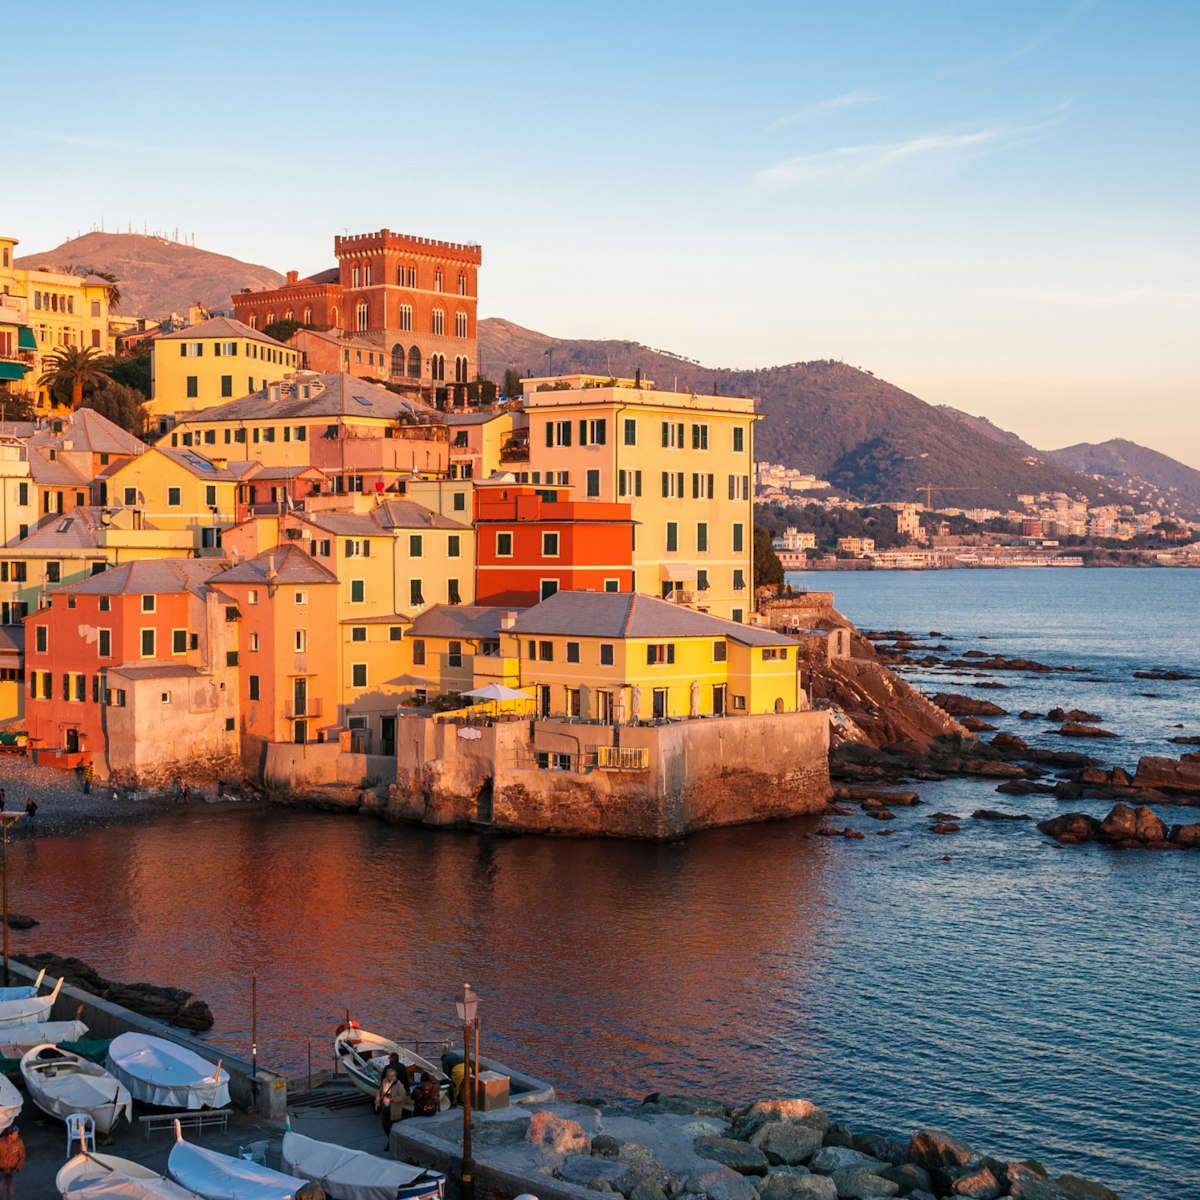 Boccadasse, a small sea district of Genoa, during the golden hour; Shutterstock ID 755753164; Your name (First / Last): Anna Tyler; GL account no.: 65050; Netsuite department name: Online Editorial; Full Product or Project name including edition: destination-image-southern-europe